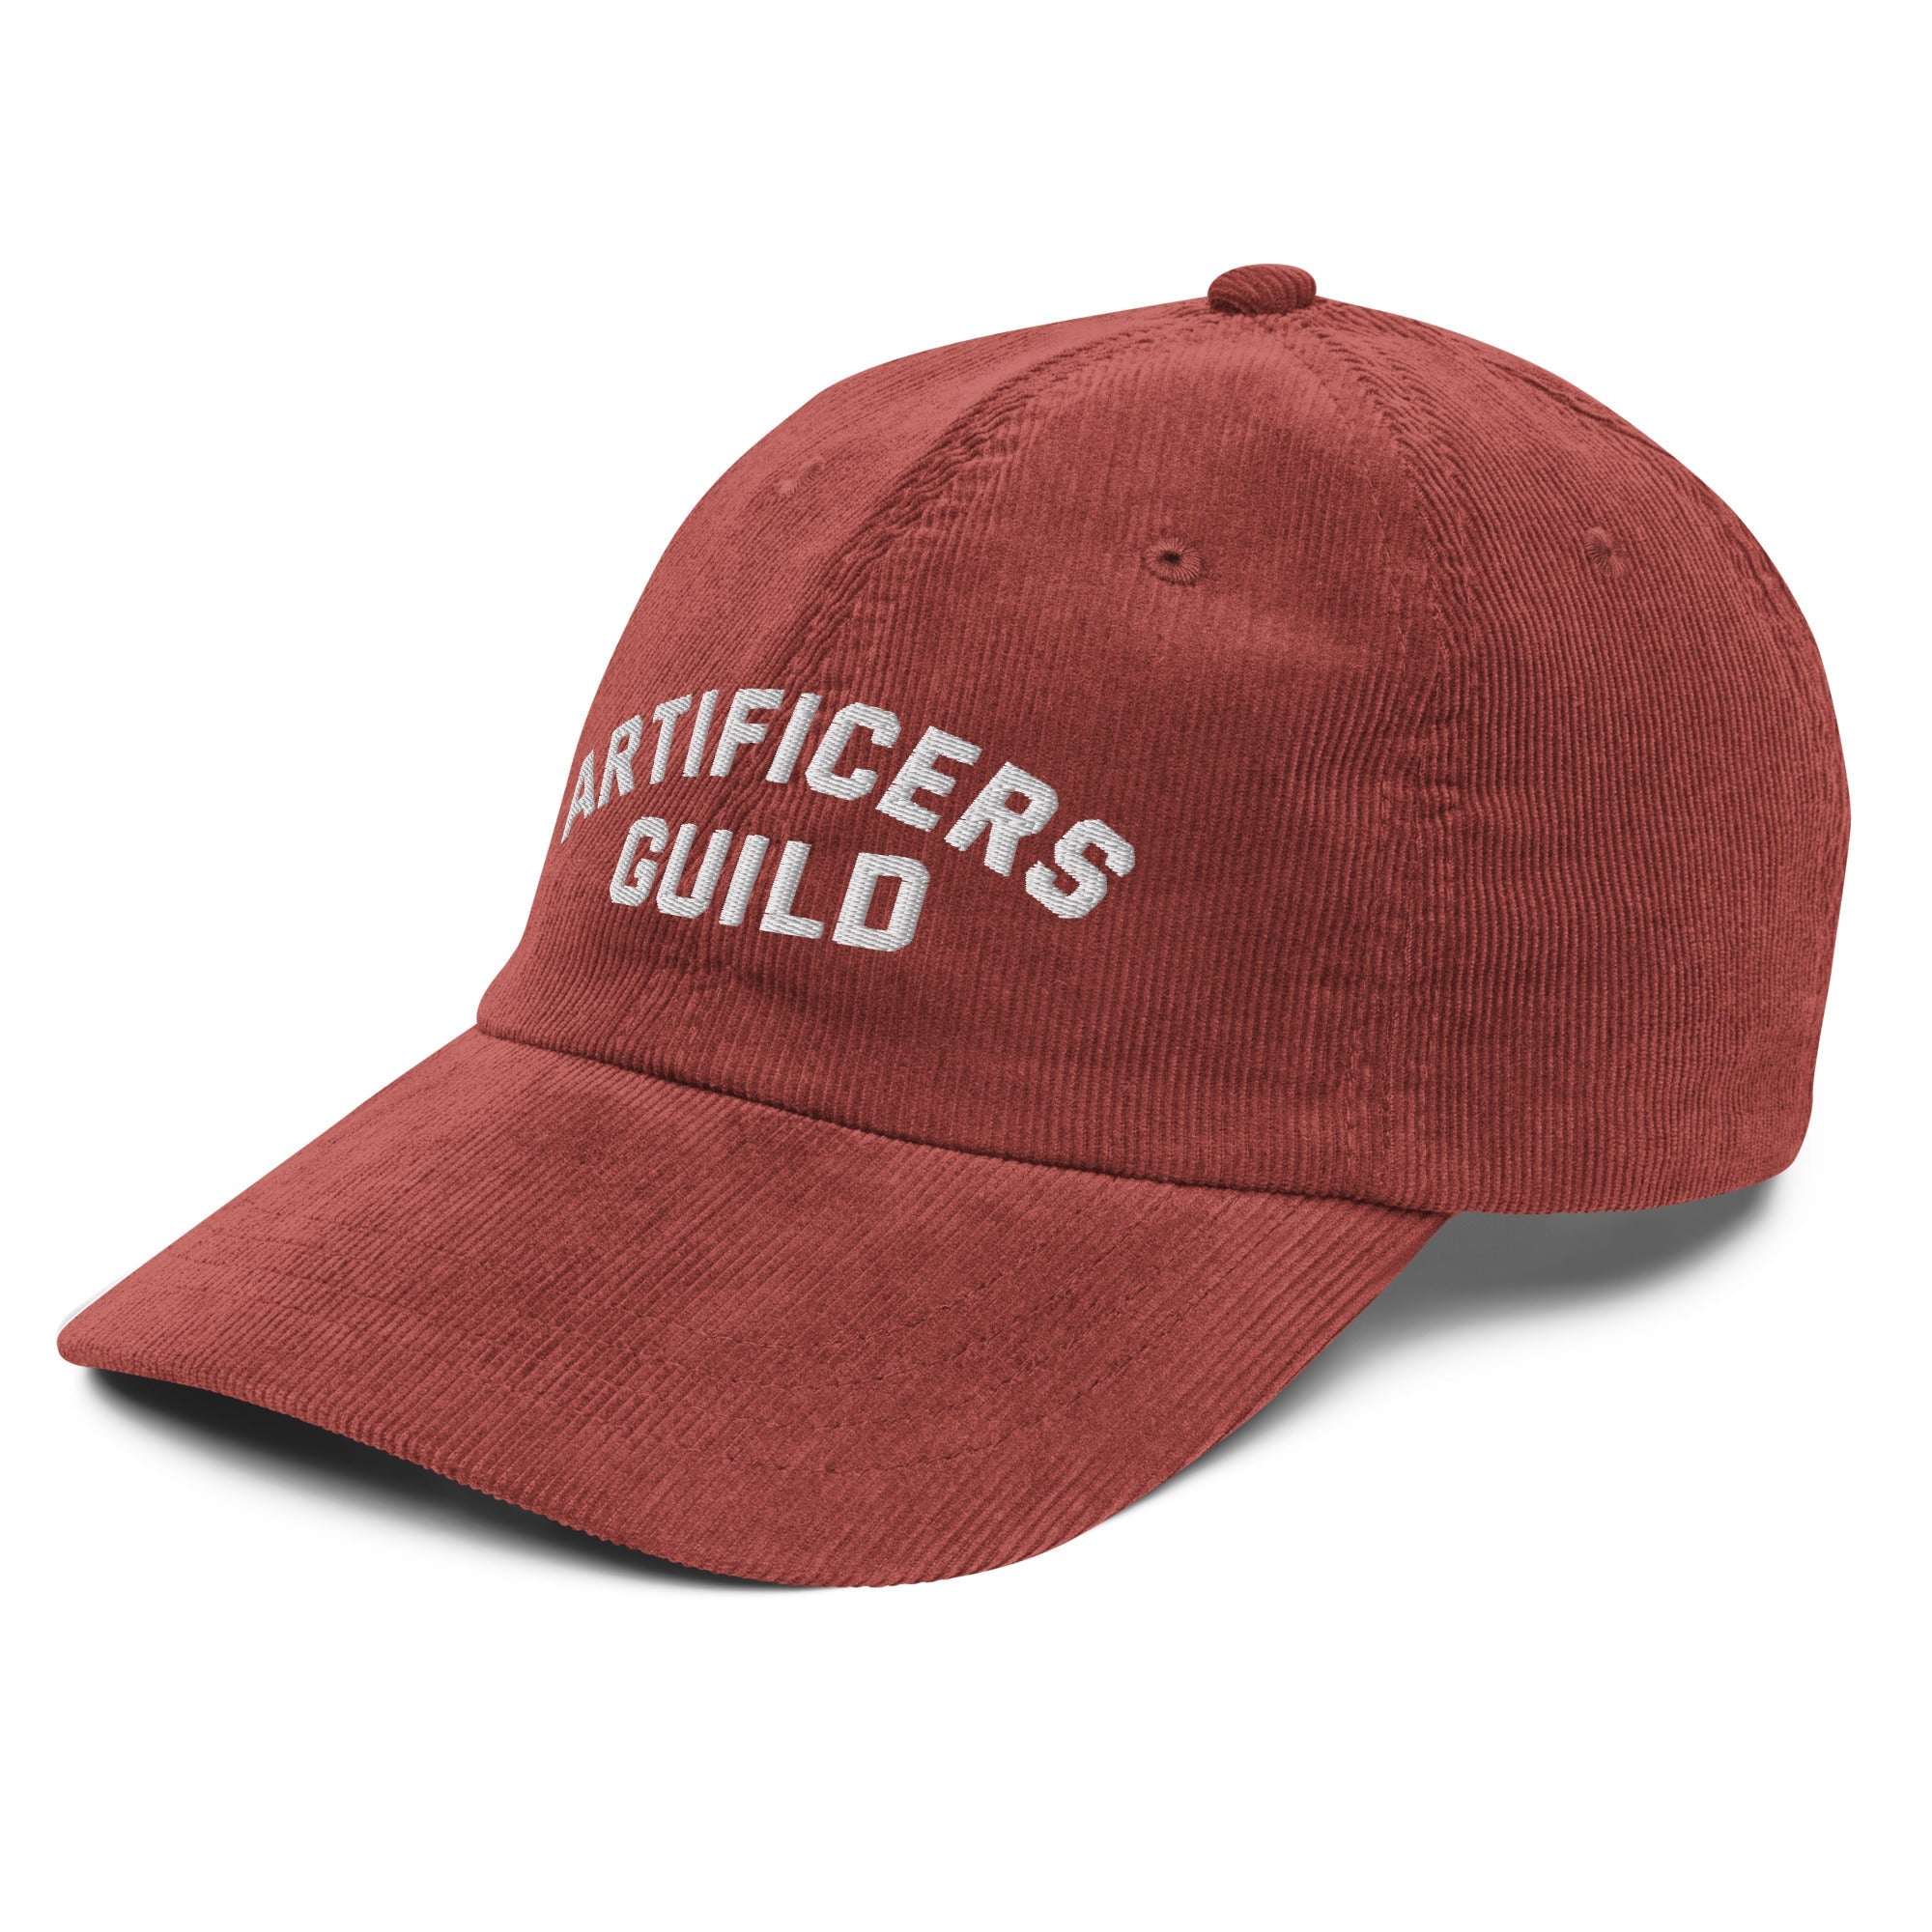 Artificer | corduroy cap - Ace of Gnomes - 8601220_16419